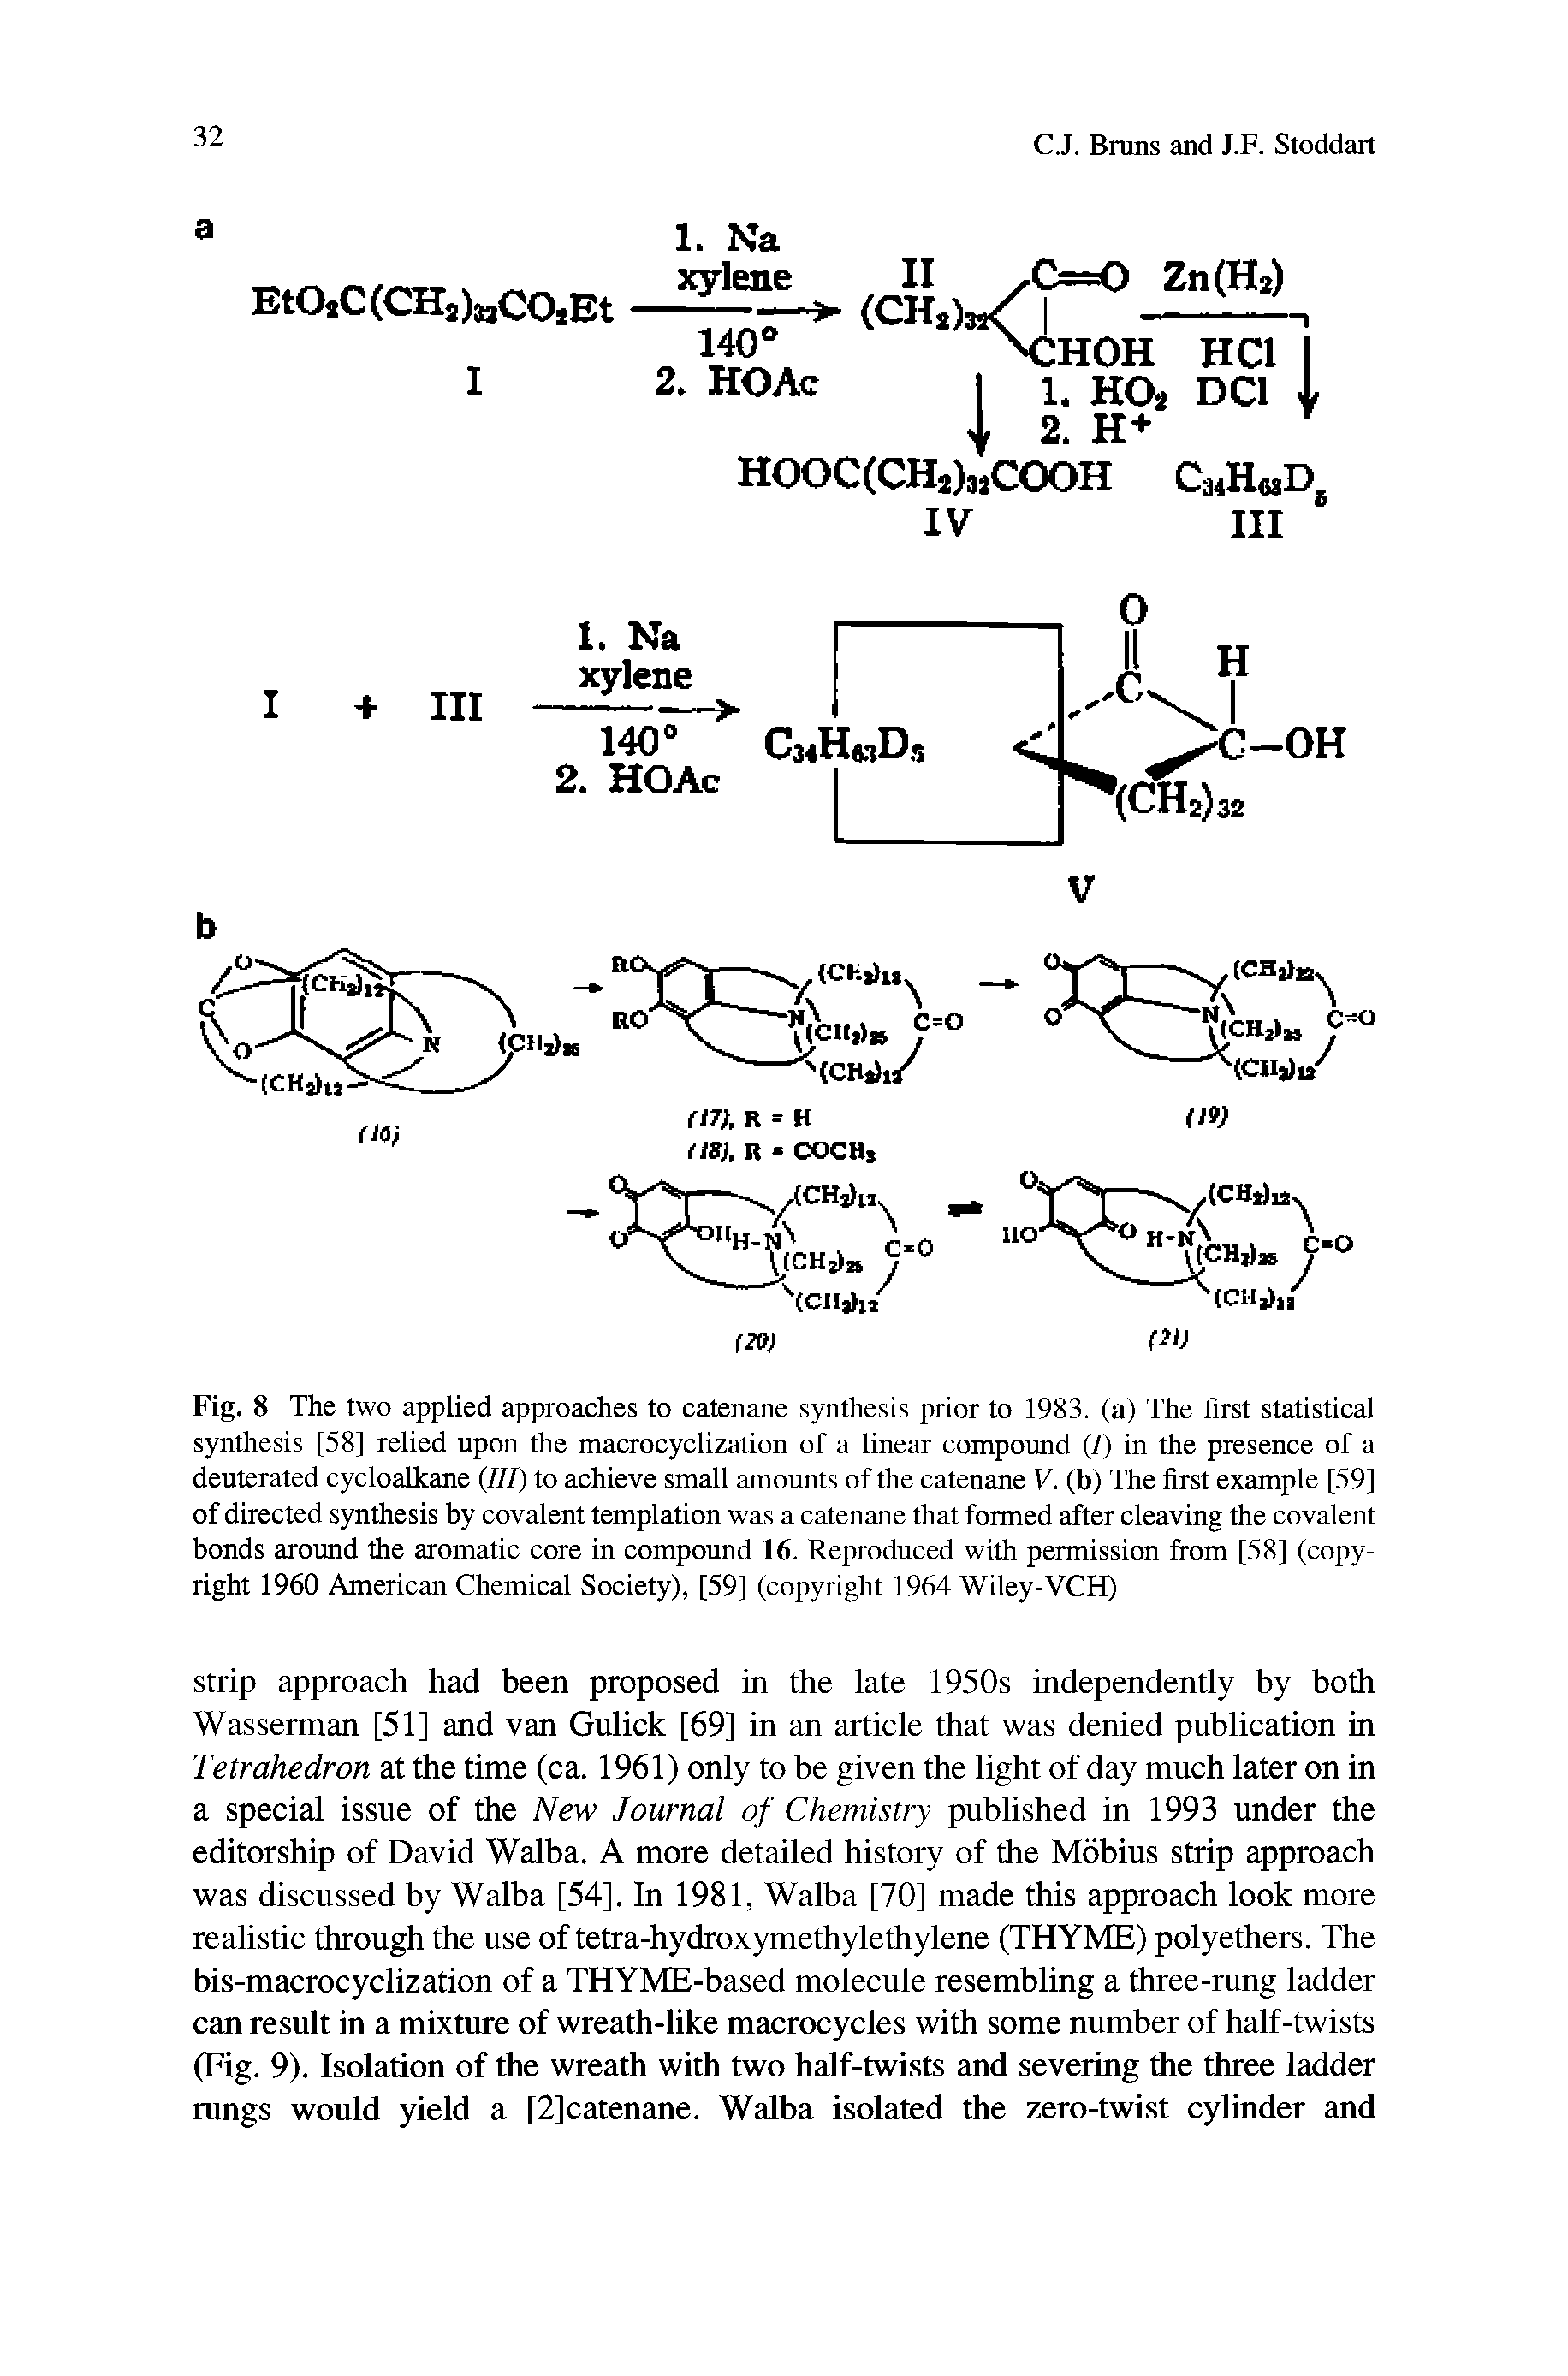 Fig. 8 The two applied approaches to catenane synthesis prior to 1983. (a) The first statistical synthesis [58] relied upon the macrocyclization of a linear compound (7) in the presence of a deuterated cycloalkane (III) to achieve small amounts of the catenane V. (b) The first example [59] of directed synthesis by covalent templation was a catenane that formed after cleaving the covalent bonds around the aromatic core in compound 16. Reproduced with permission from [58] (copyright 1960 American Chemical Society), [59] (copyright 1964 Wiley-VCH)...